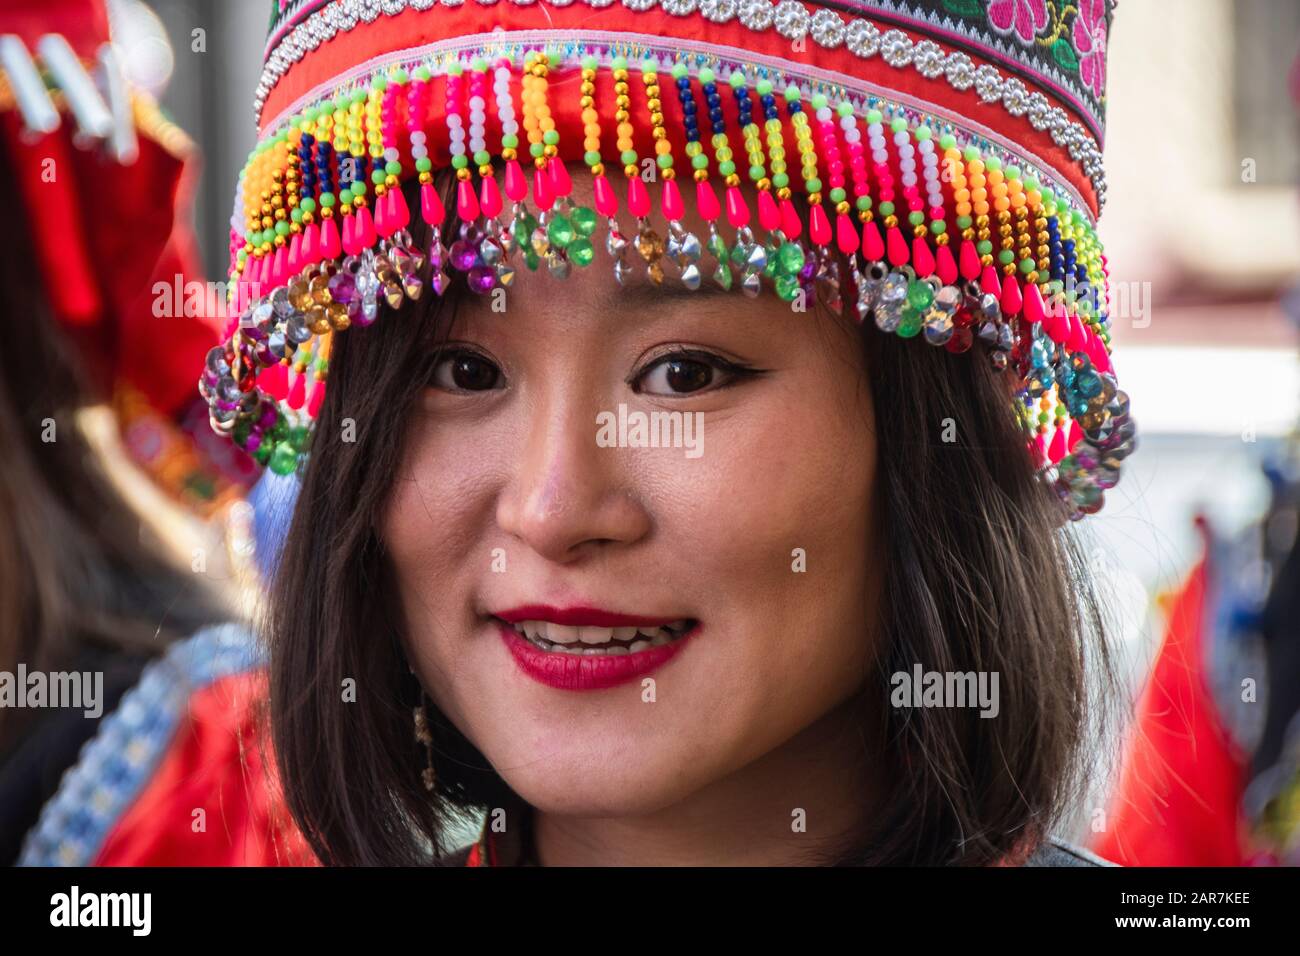 chinese new year celebrations 2020, “year of the rat” in the neighbourhood of usera in Madrid, Spain. Stock Photo